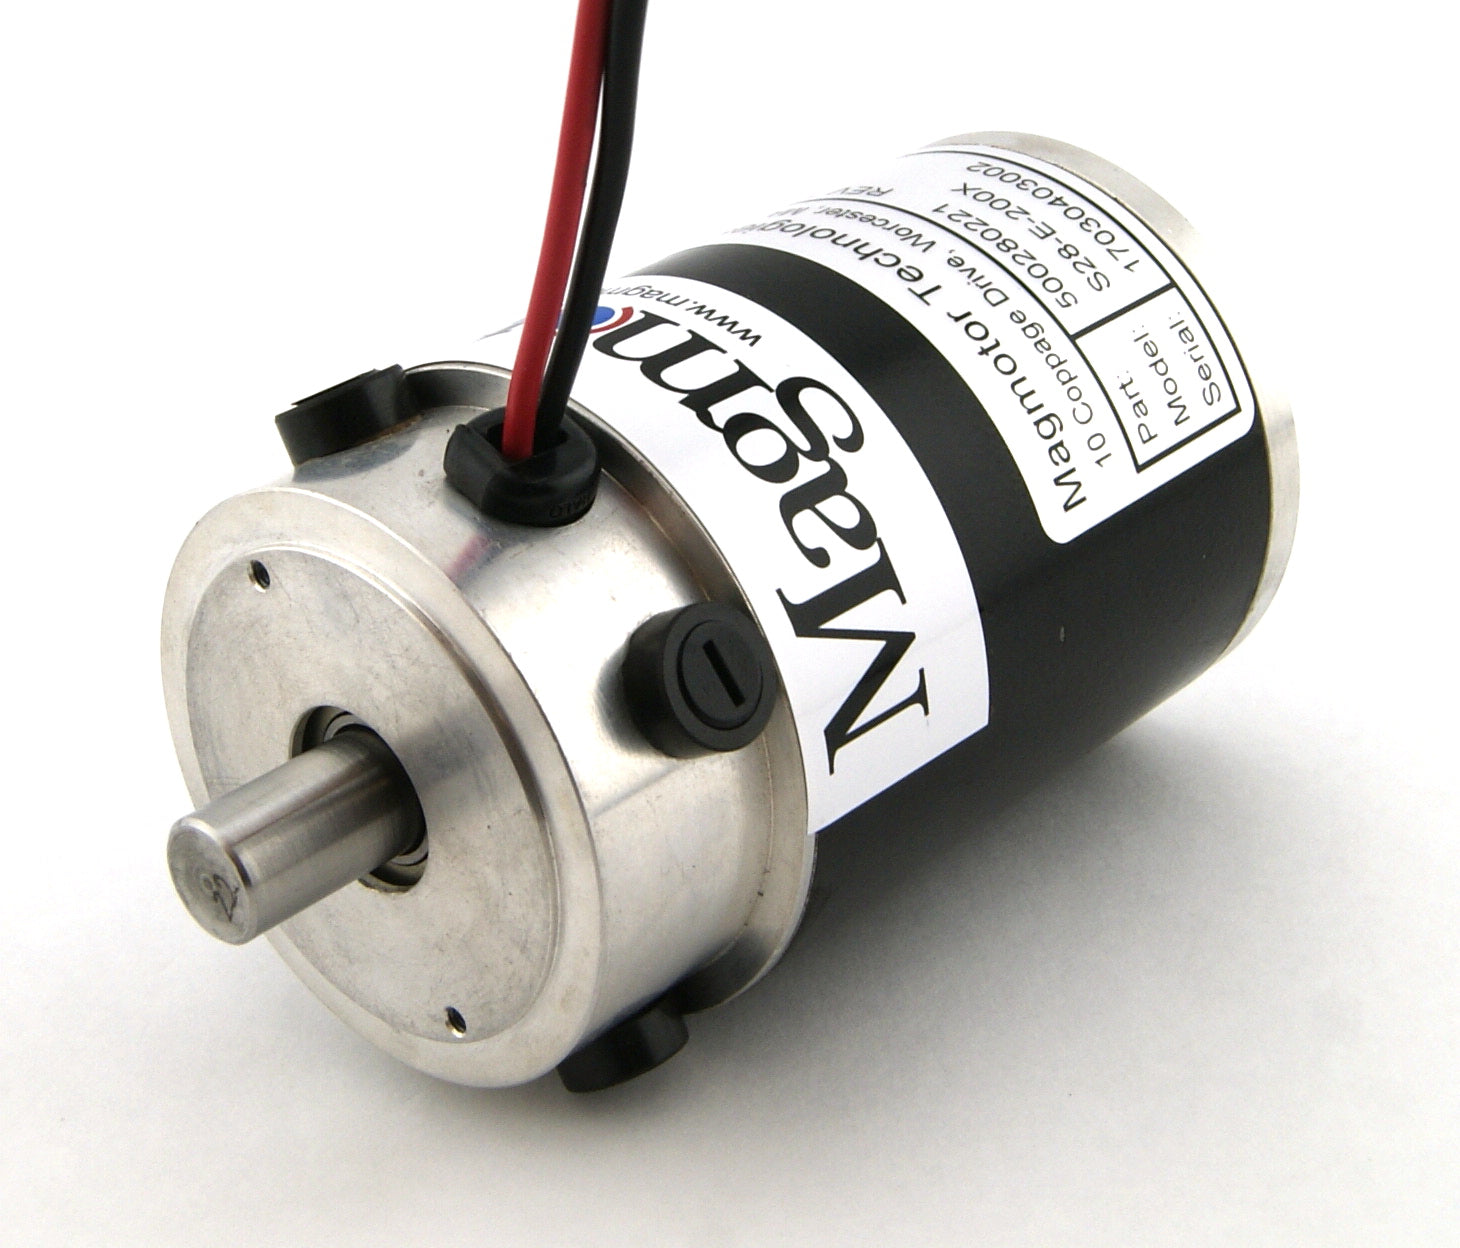 500280221 - BRUSHED MOTOR - 12 to 30 VDC - 66 to 110 oz-in CONT 